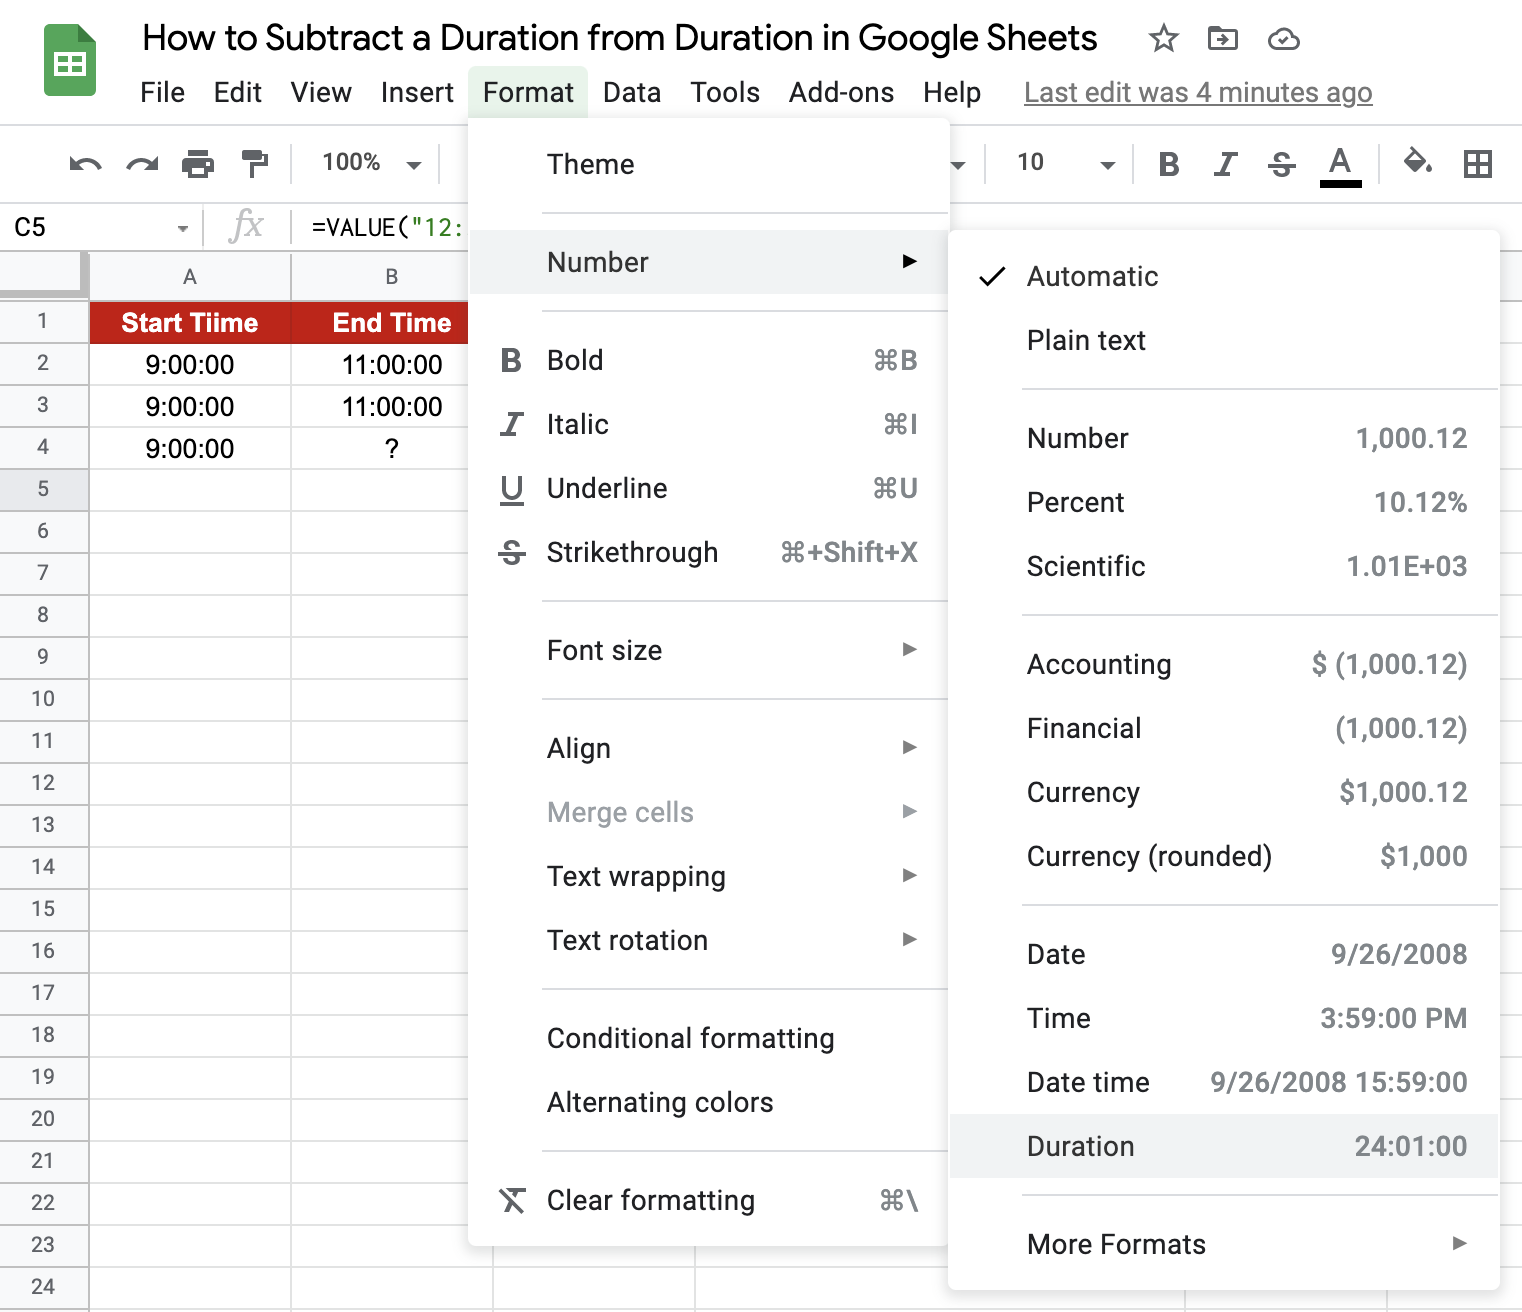 Subtract Durations in Google Sheets